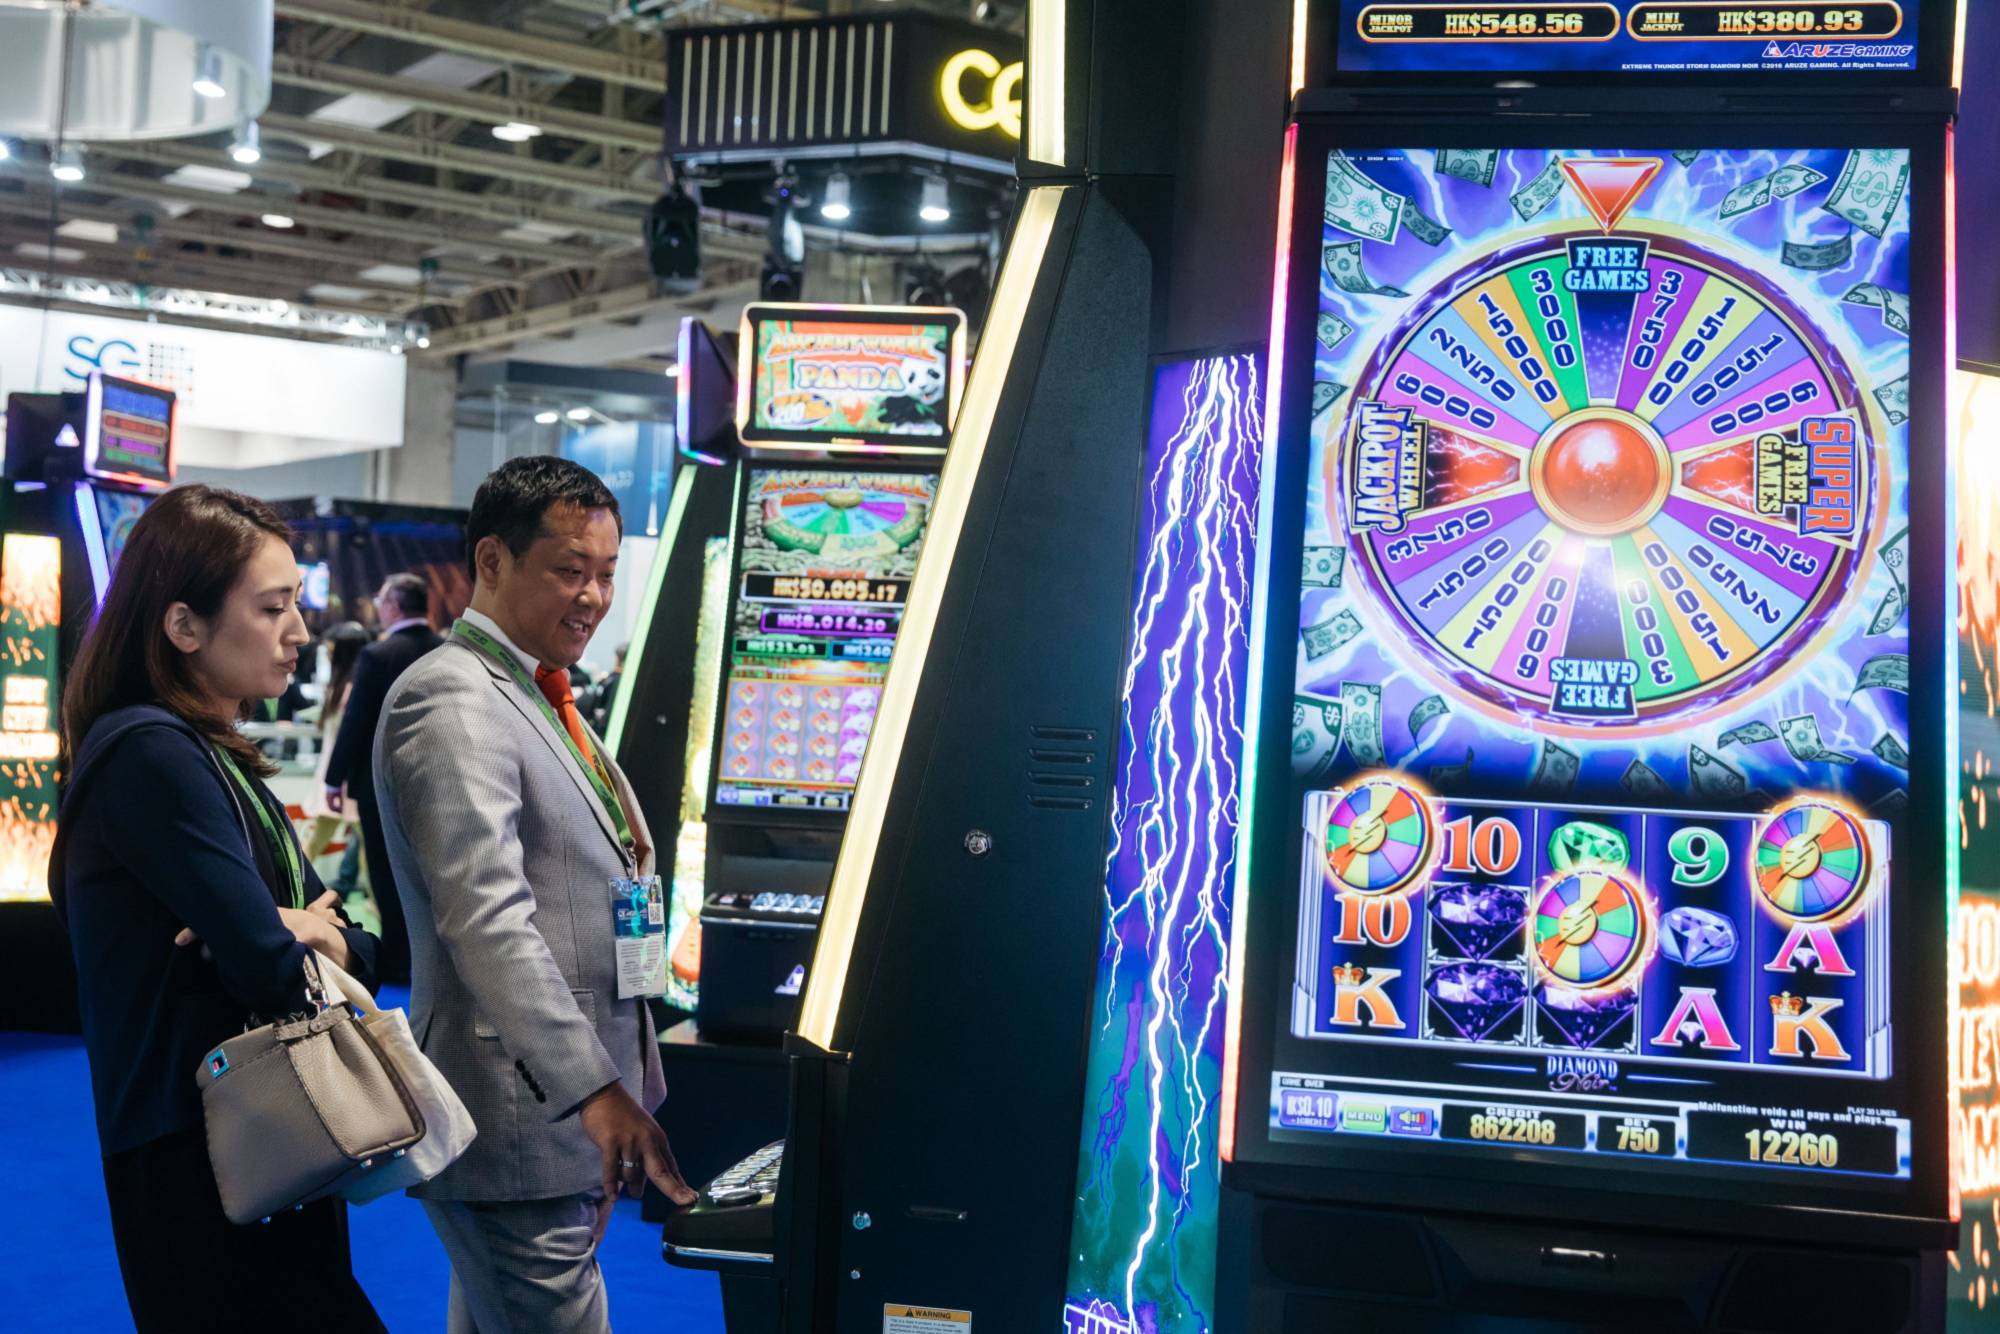 Customers play a slot machine at the Venetian Macao resort and casino, run by a unit of Las Vegas Sands Corp. in Macao. The company's withdrawal from its quest to win permission to build an integrated casino resort is a major setback in Japan’s efforts to introduce casinos. | BLOOMBERG